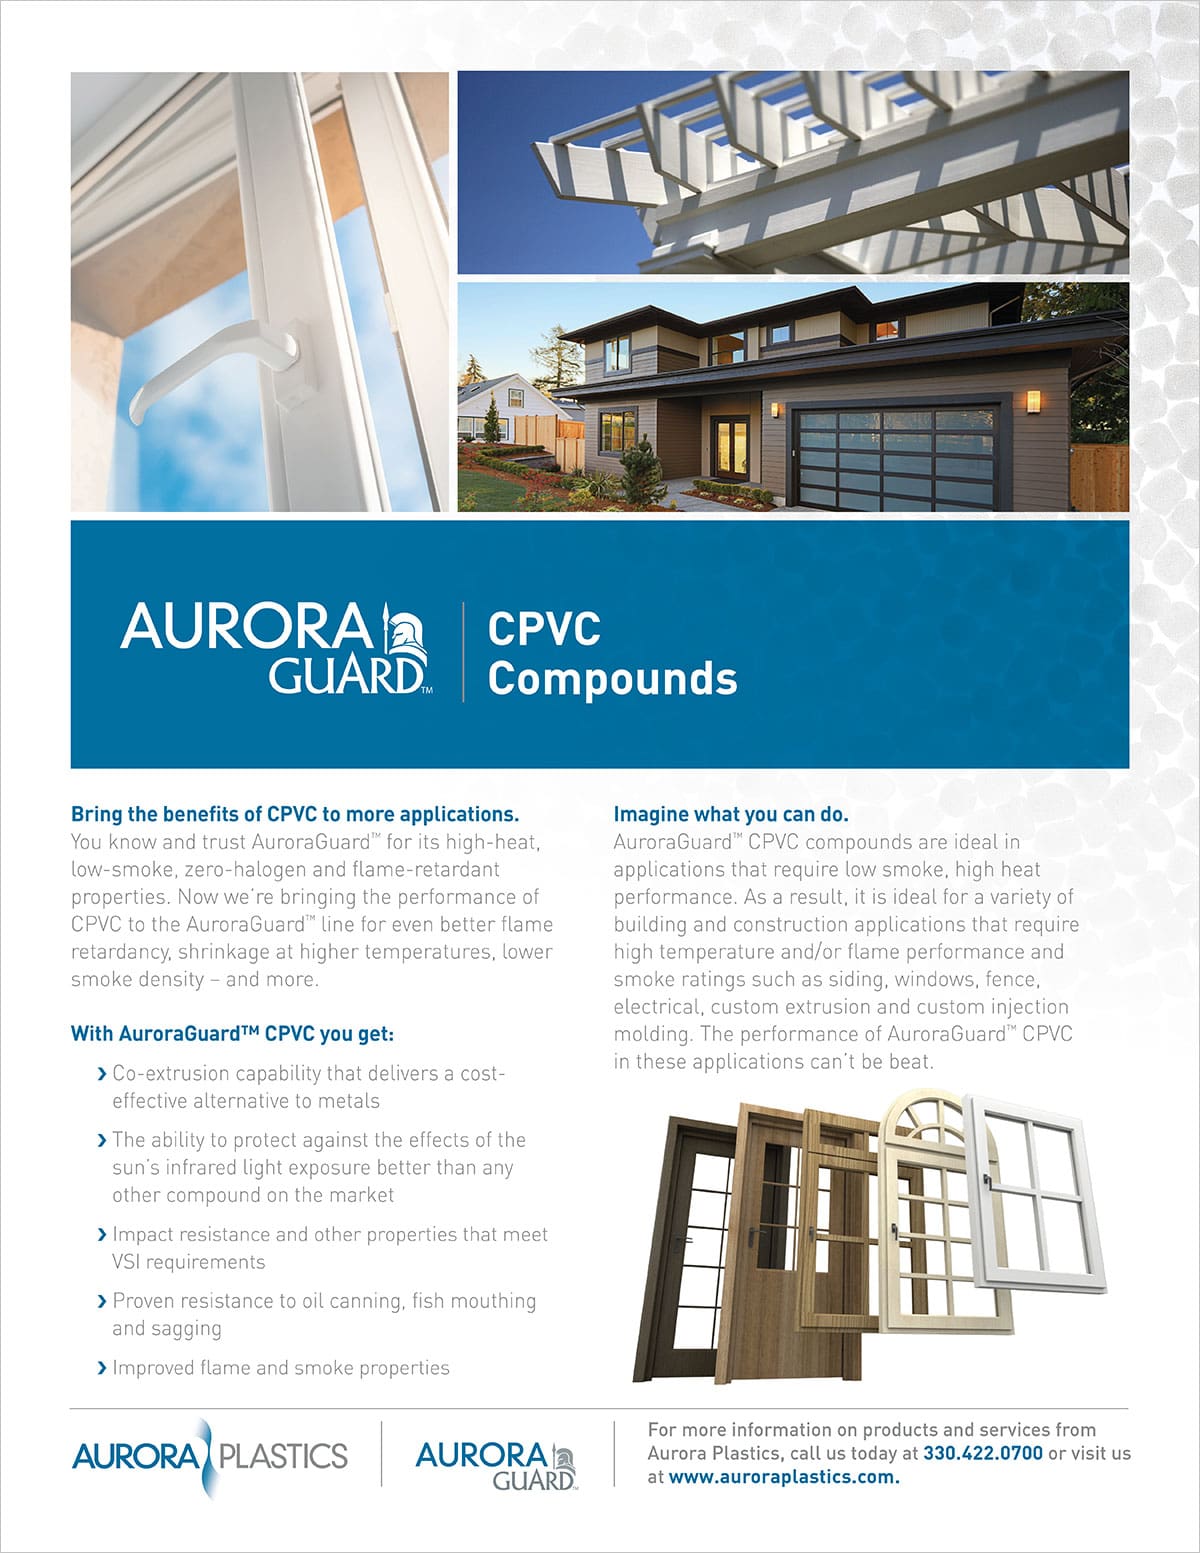 Aurora Material Solutions CPVC compounds are highly impact resistant and weatherable, they meet AAMA (American Architectural Manufacturers Association) standards for outdoor performance for applications like windows, doors, siding & garage doors. These compounds are available in powder or pellet form and can be processed through extrusion. They are available in a wide range of colors for added application flexibility.